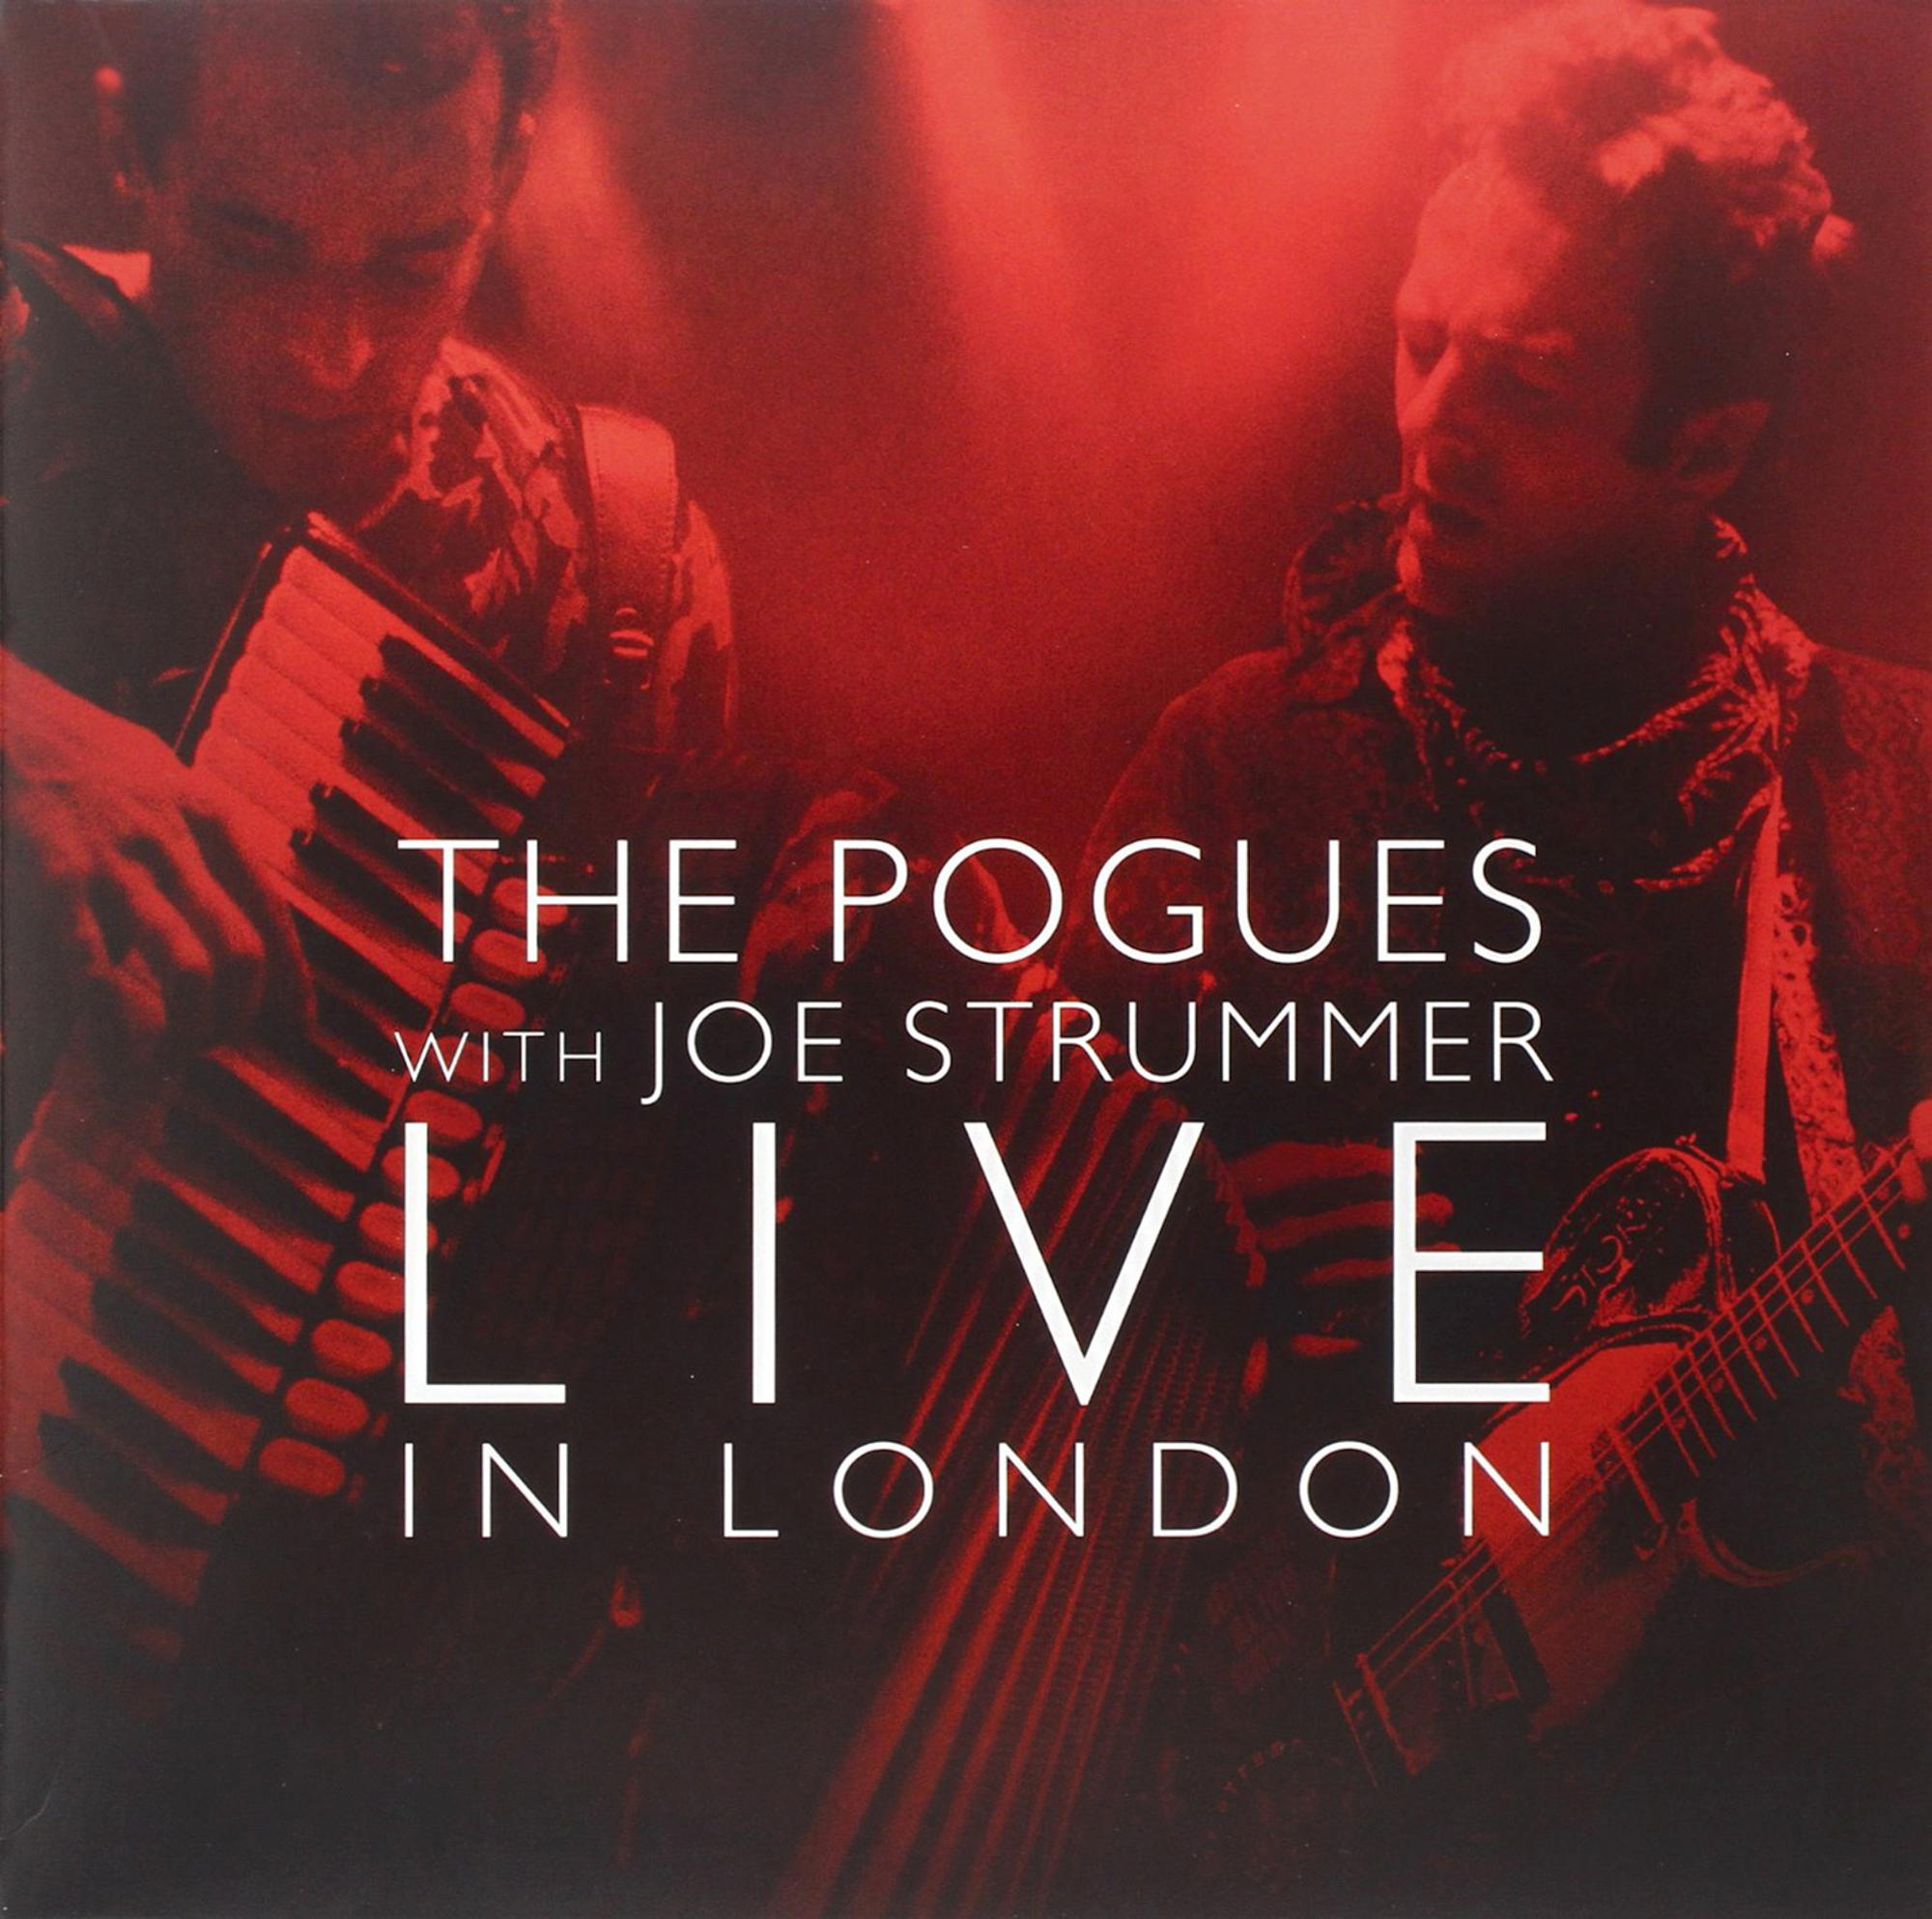 - The - London (Vinyl) Pogues The With 1991 Live Pogues Strummer In Joe